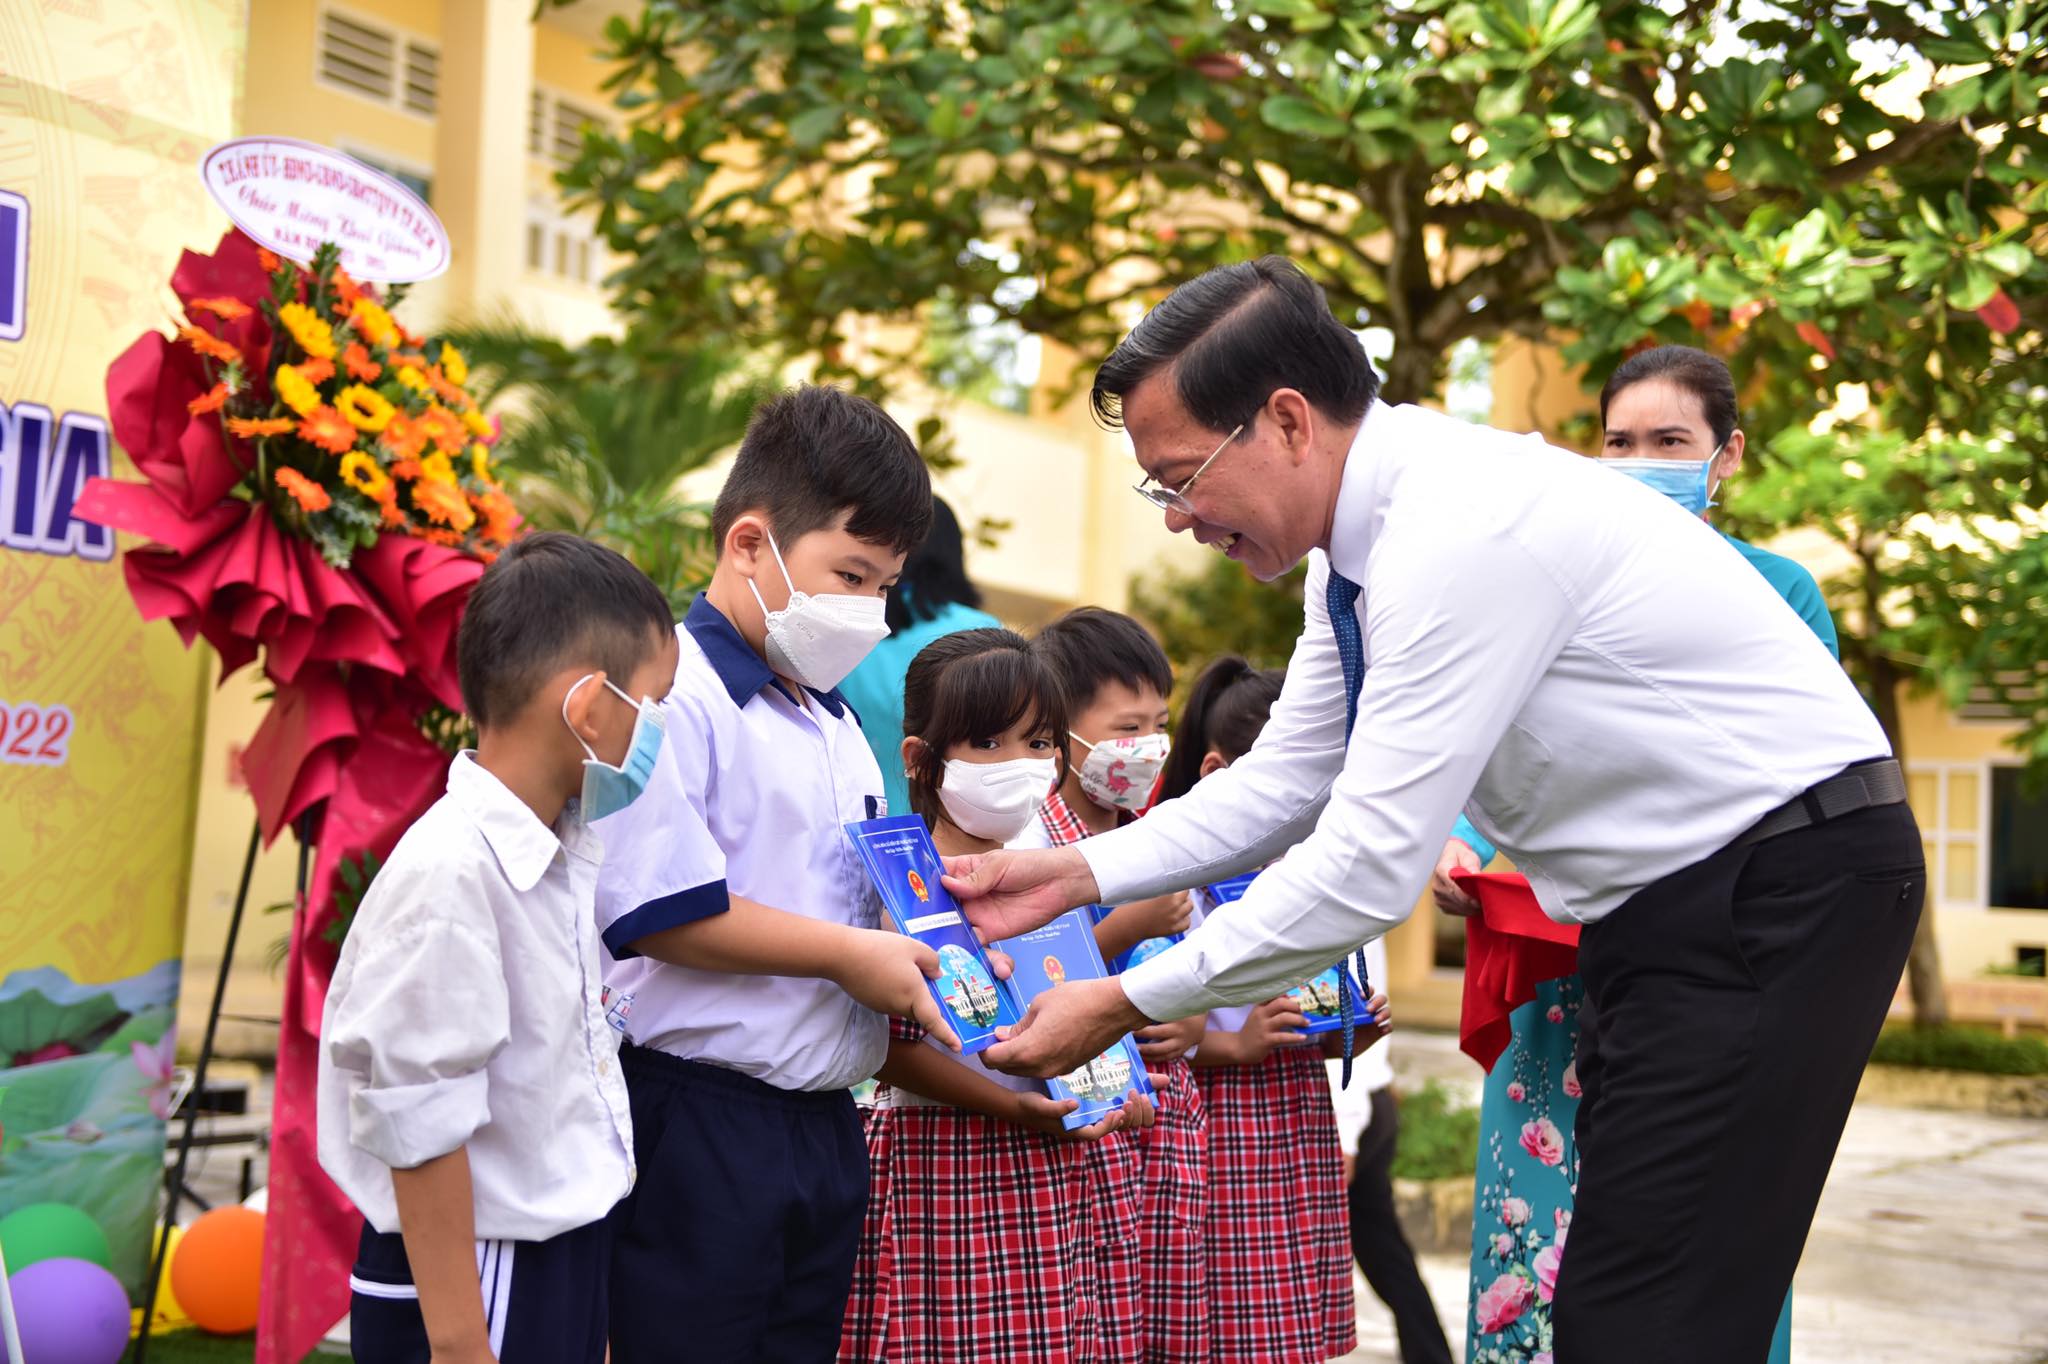 Chairman of the People’s Committee of Ho Chi Minh City Phan Van Mai hands over financial support to underprivileged students of Ly Nhon Elementary School in the rural Can Gio District during a school opening ceremony, September 5, 2022. Photo: Ngoc Phuong / Tuoi Tre